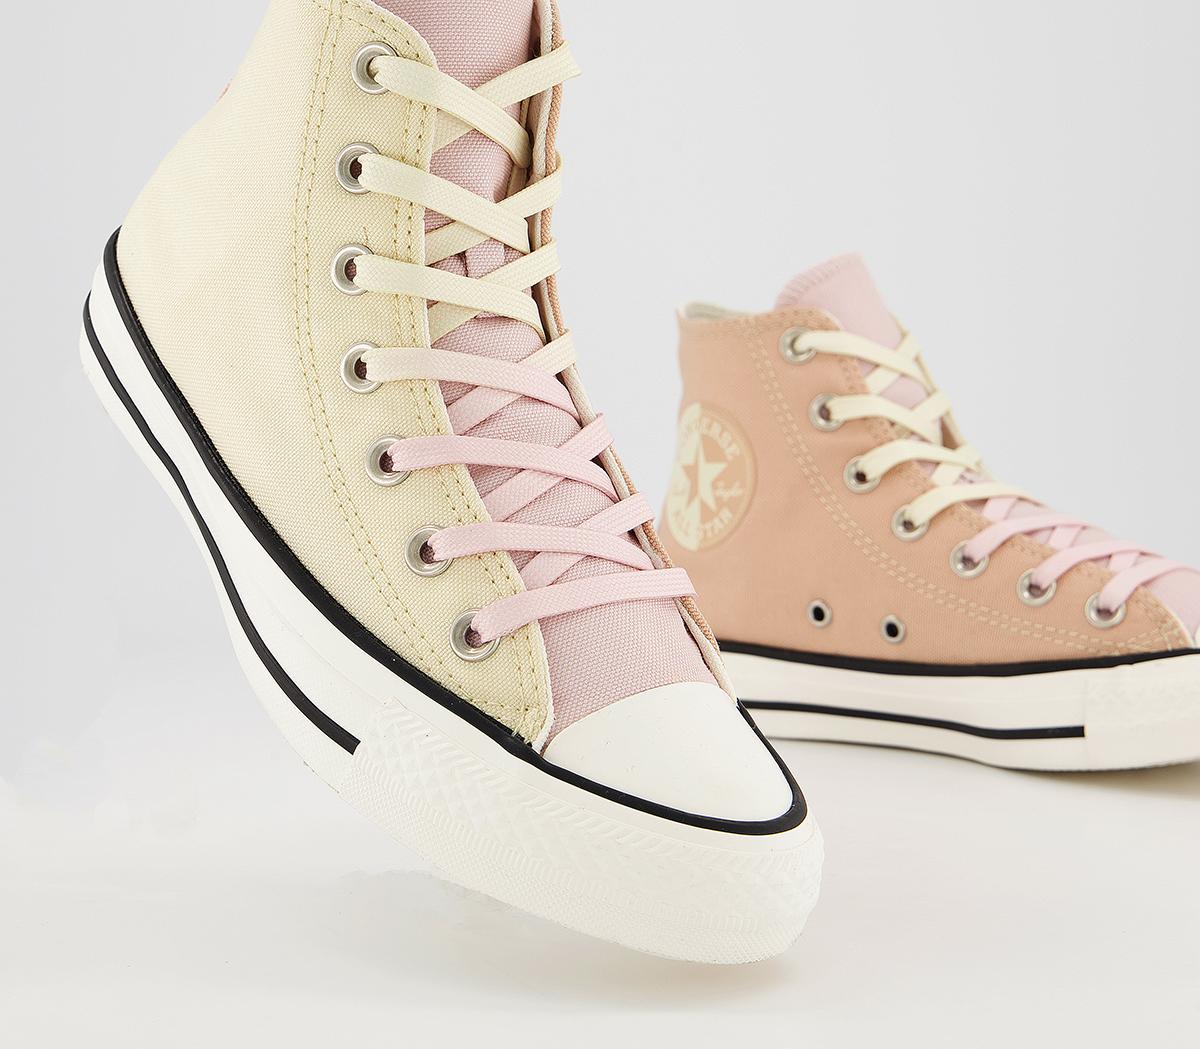 Converse Converse All Star Hi Trainers Barley Shimmer Barely Rose ...